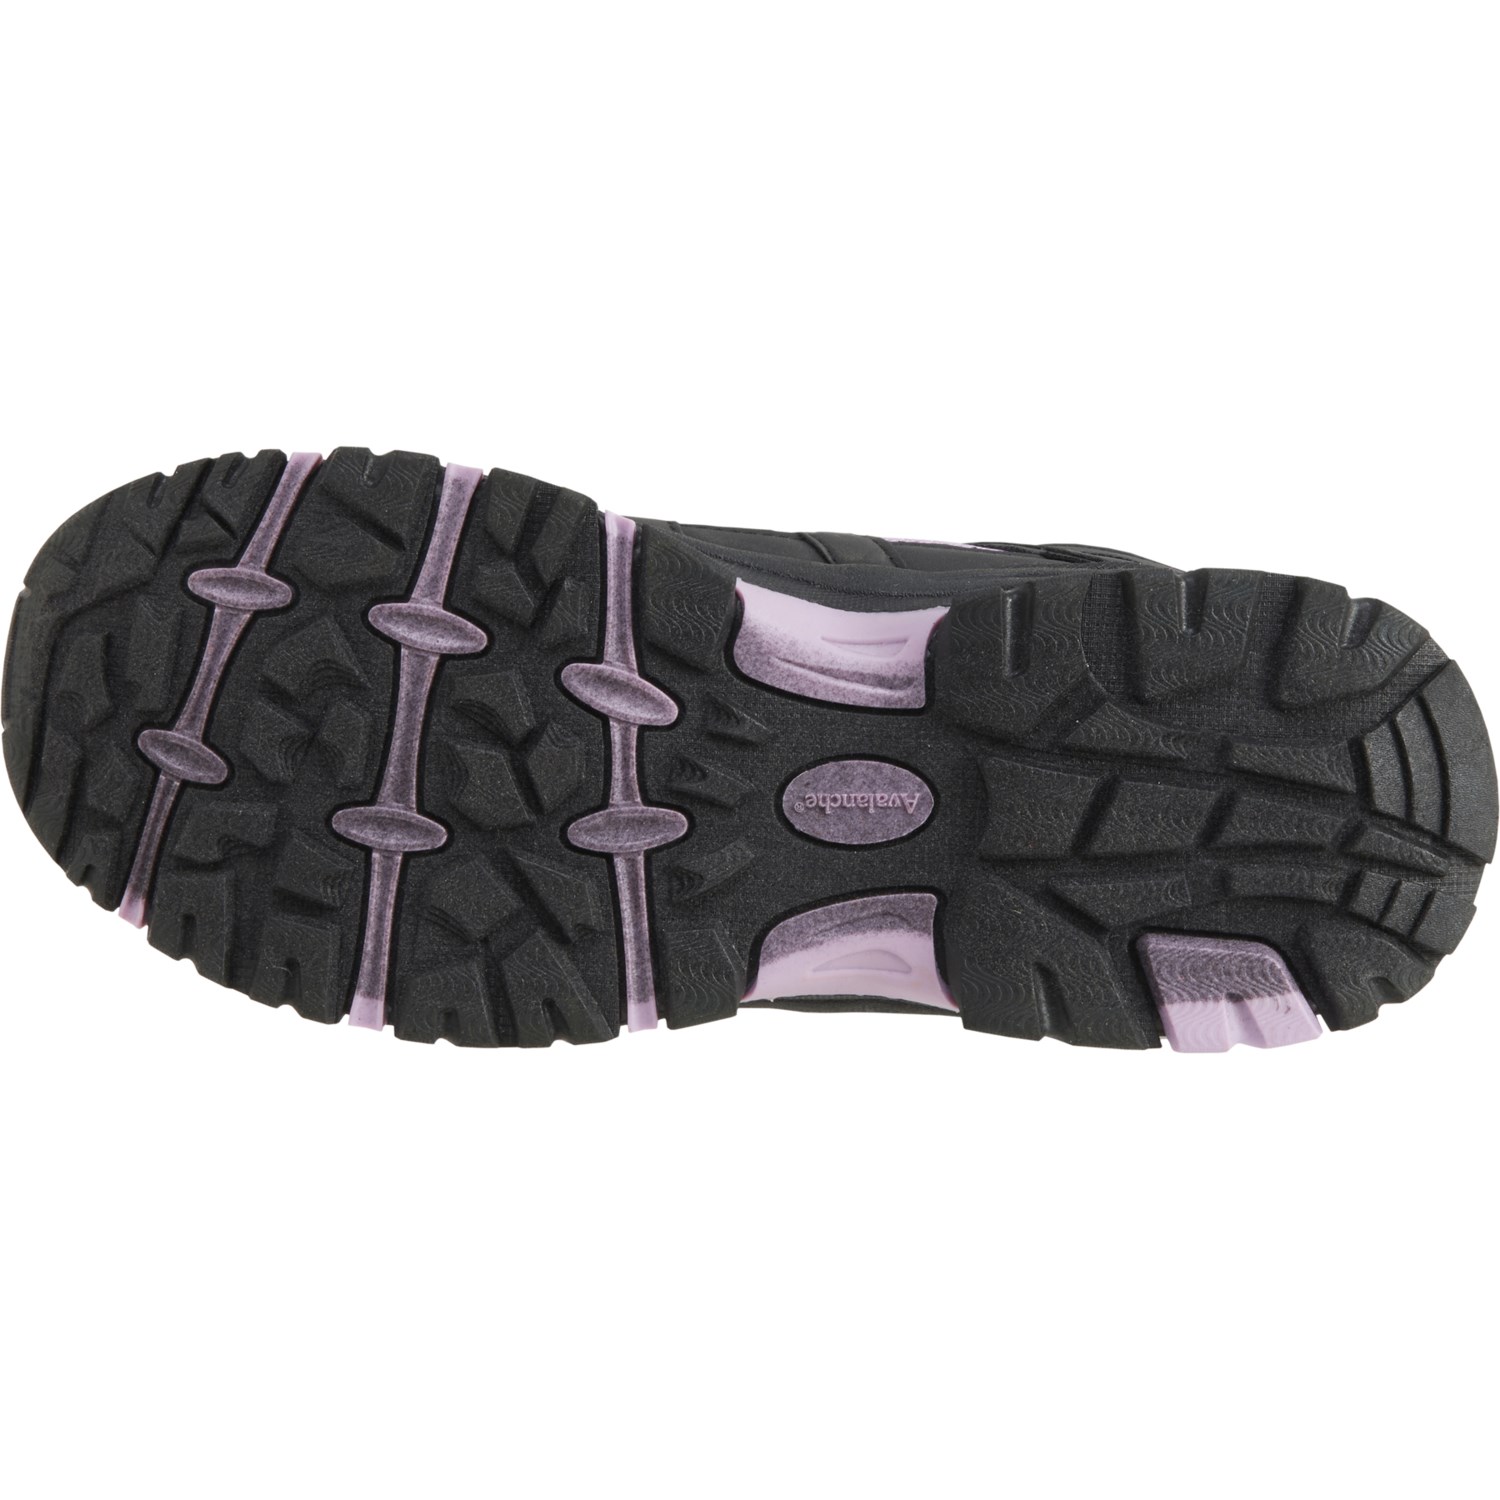 Avalanche Ridge Hiking Boots (For Women)